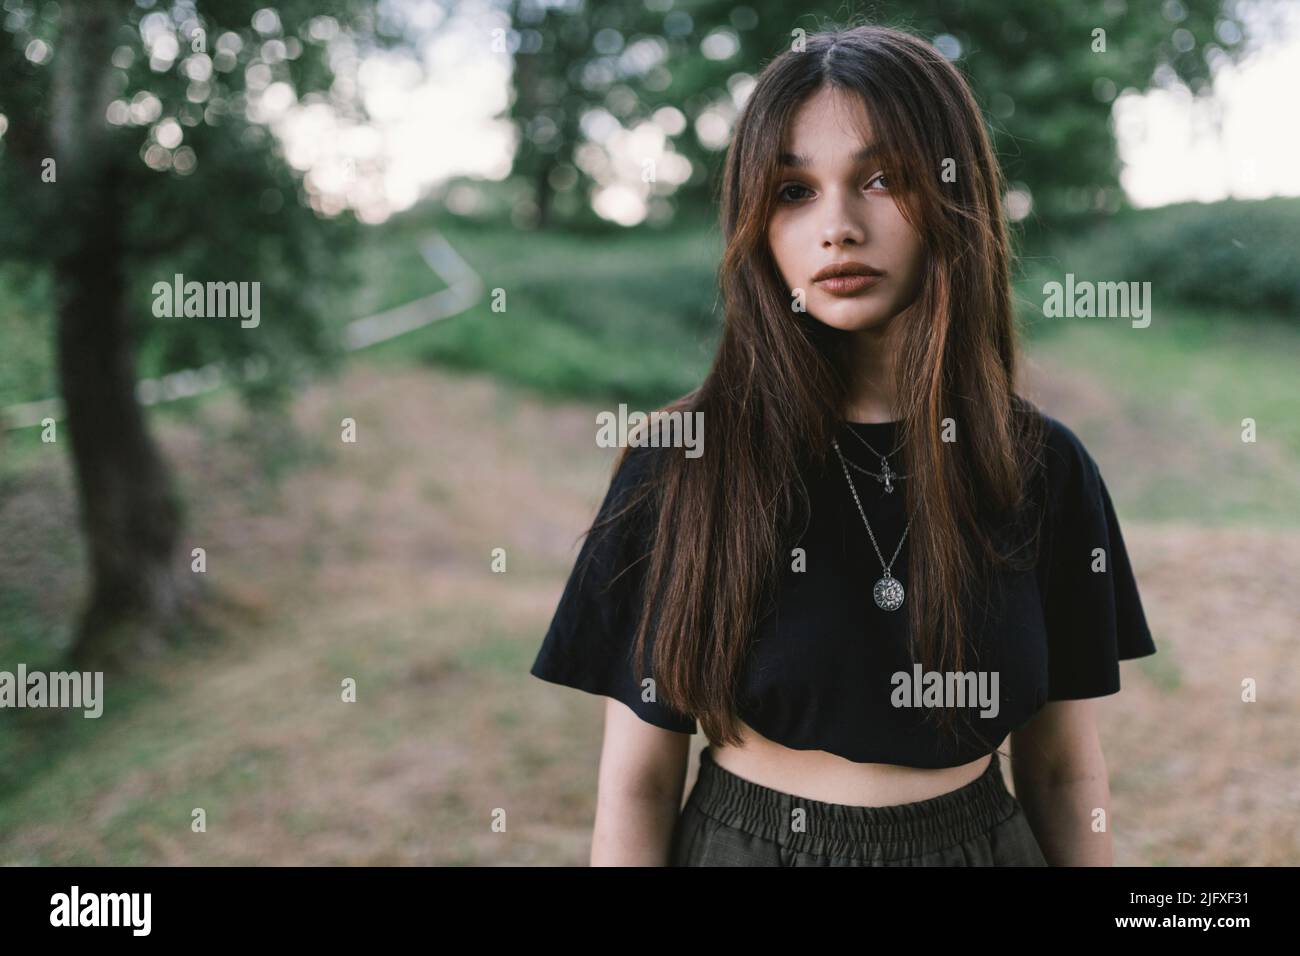 young beautiful girl portrait in the park Stock Photo